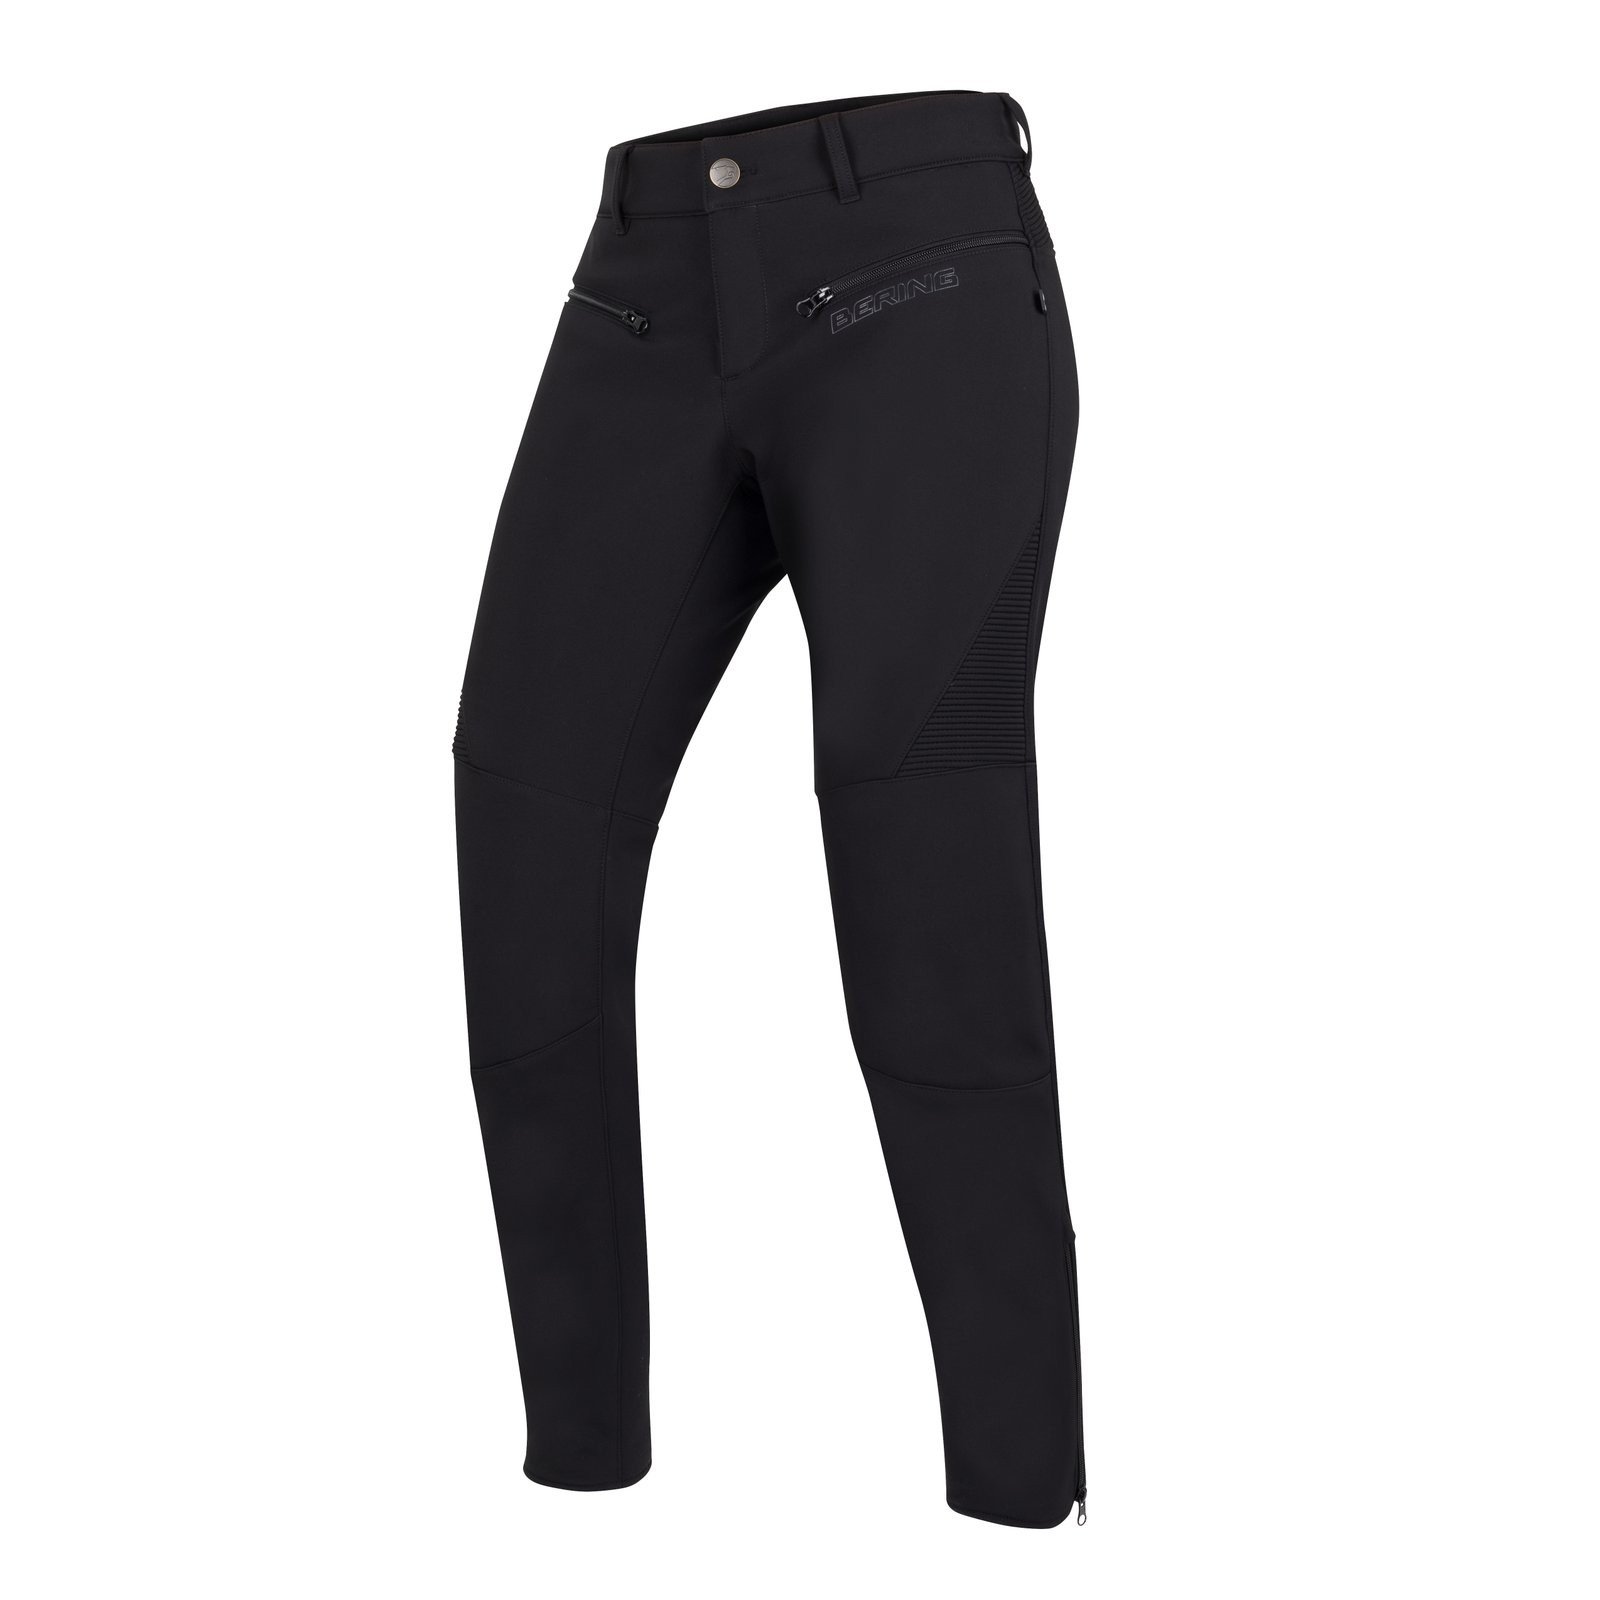 Image of Bering Lady Alkor Trousers Black Size T2 ID 3660815150832